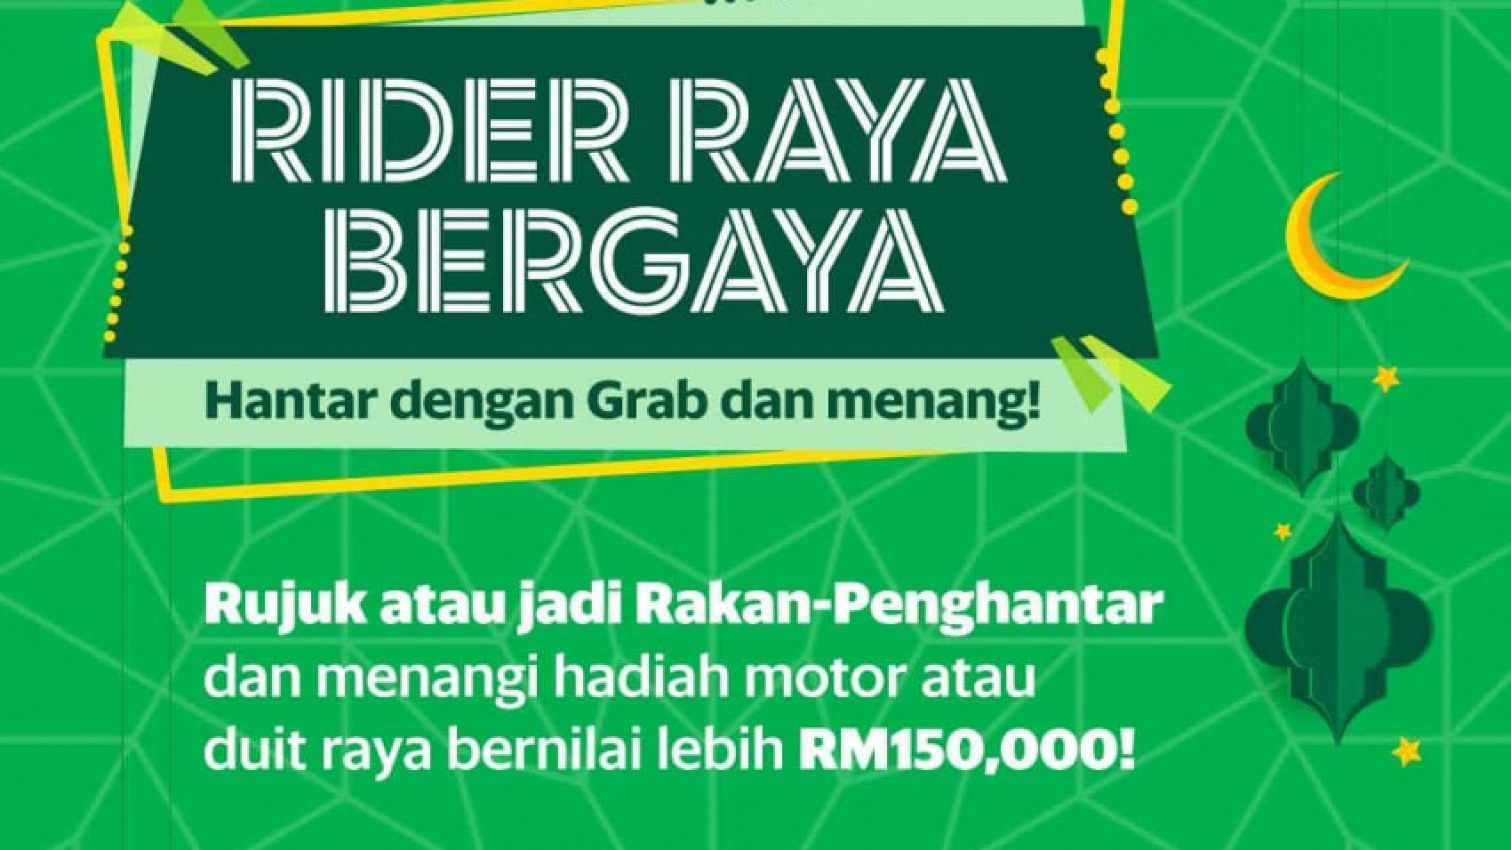 autos, cars, featured, yamaha, delivery, grab, grab malaysia, logistics, malaysia, yamaha mt-25 motorcycle and cash prizes up for grabs in grab malaysia recruitment campaign